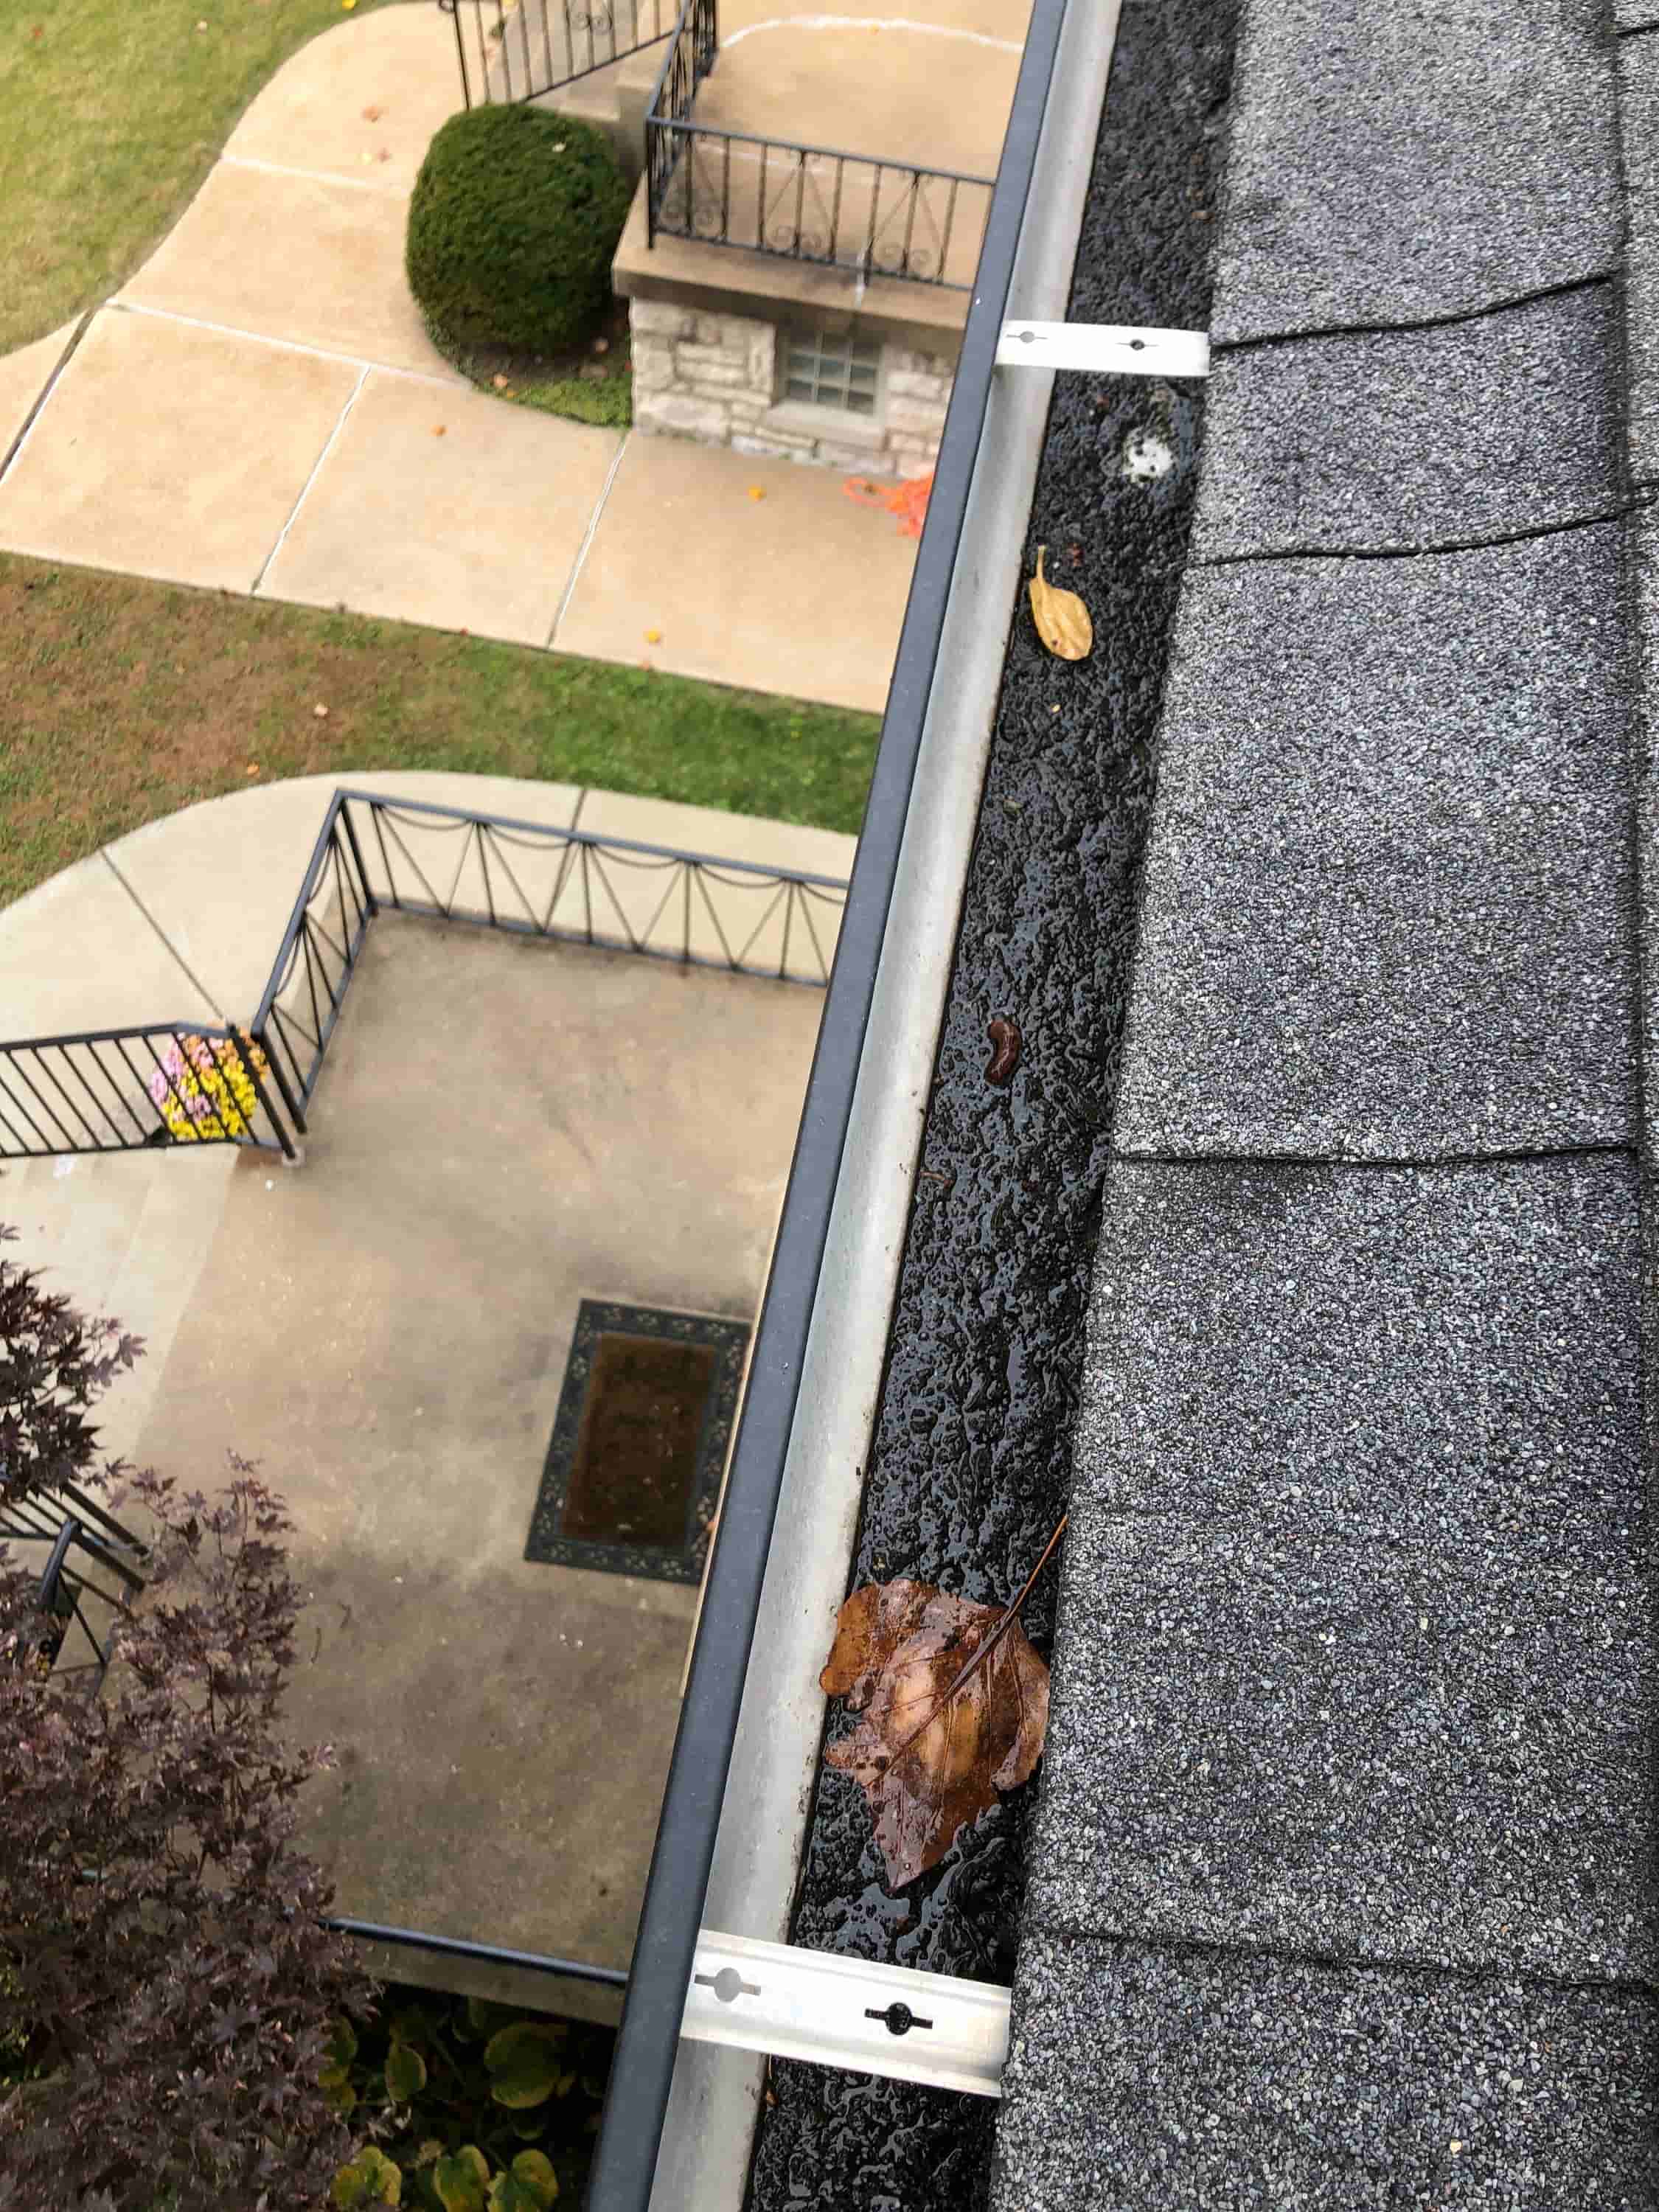 gutter cleaning tools for leaf blower